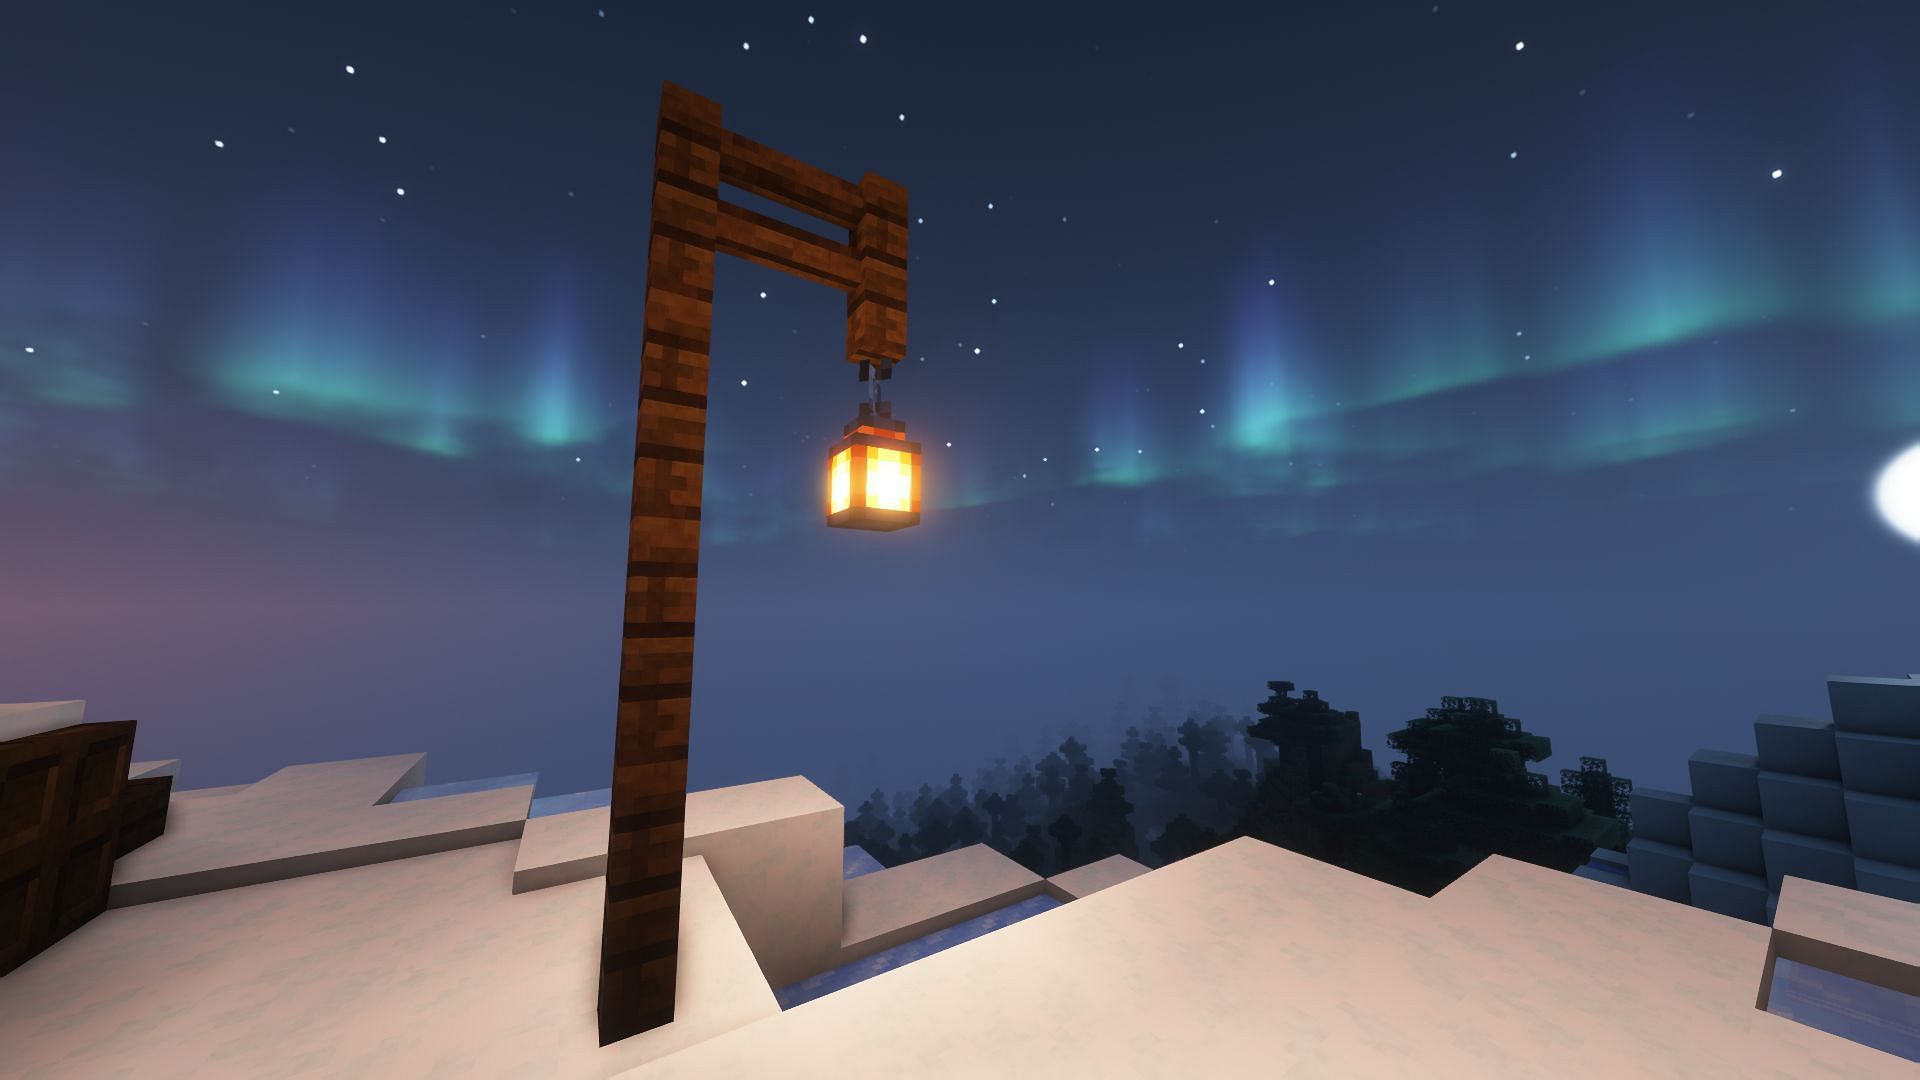 Street lamps are one of the simplest forms of decorative lighting in Minecraft (Image via Mojang)